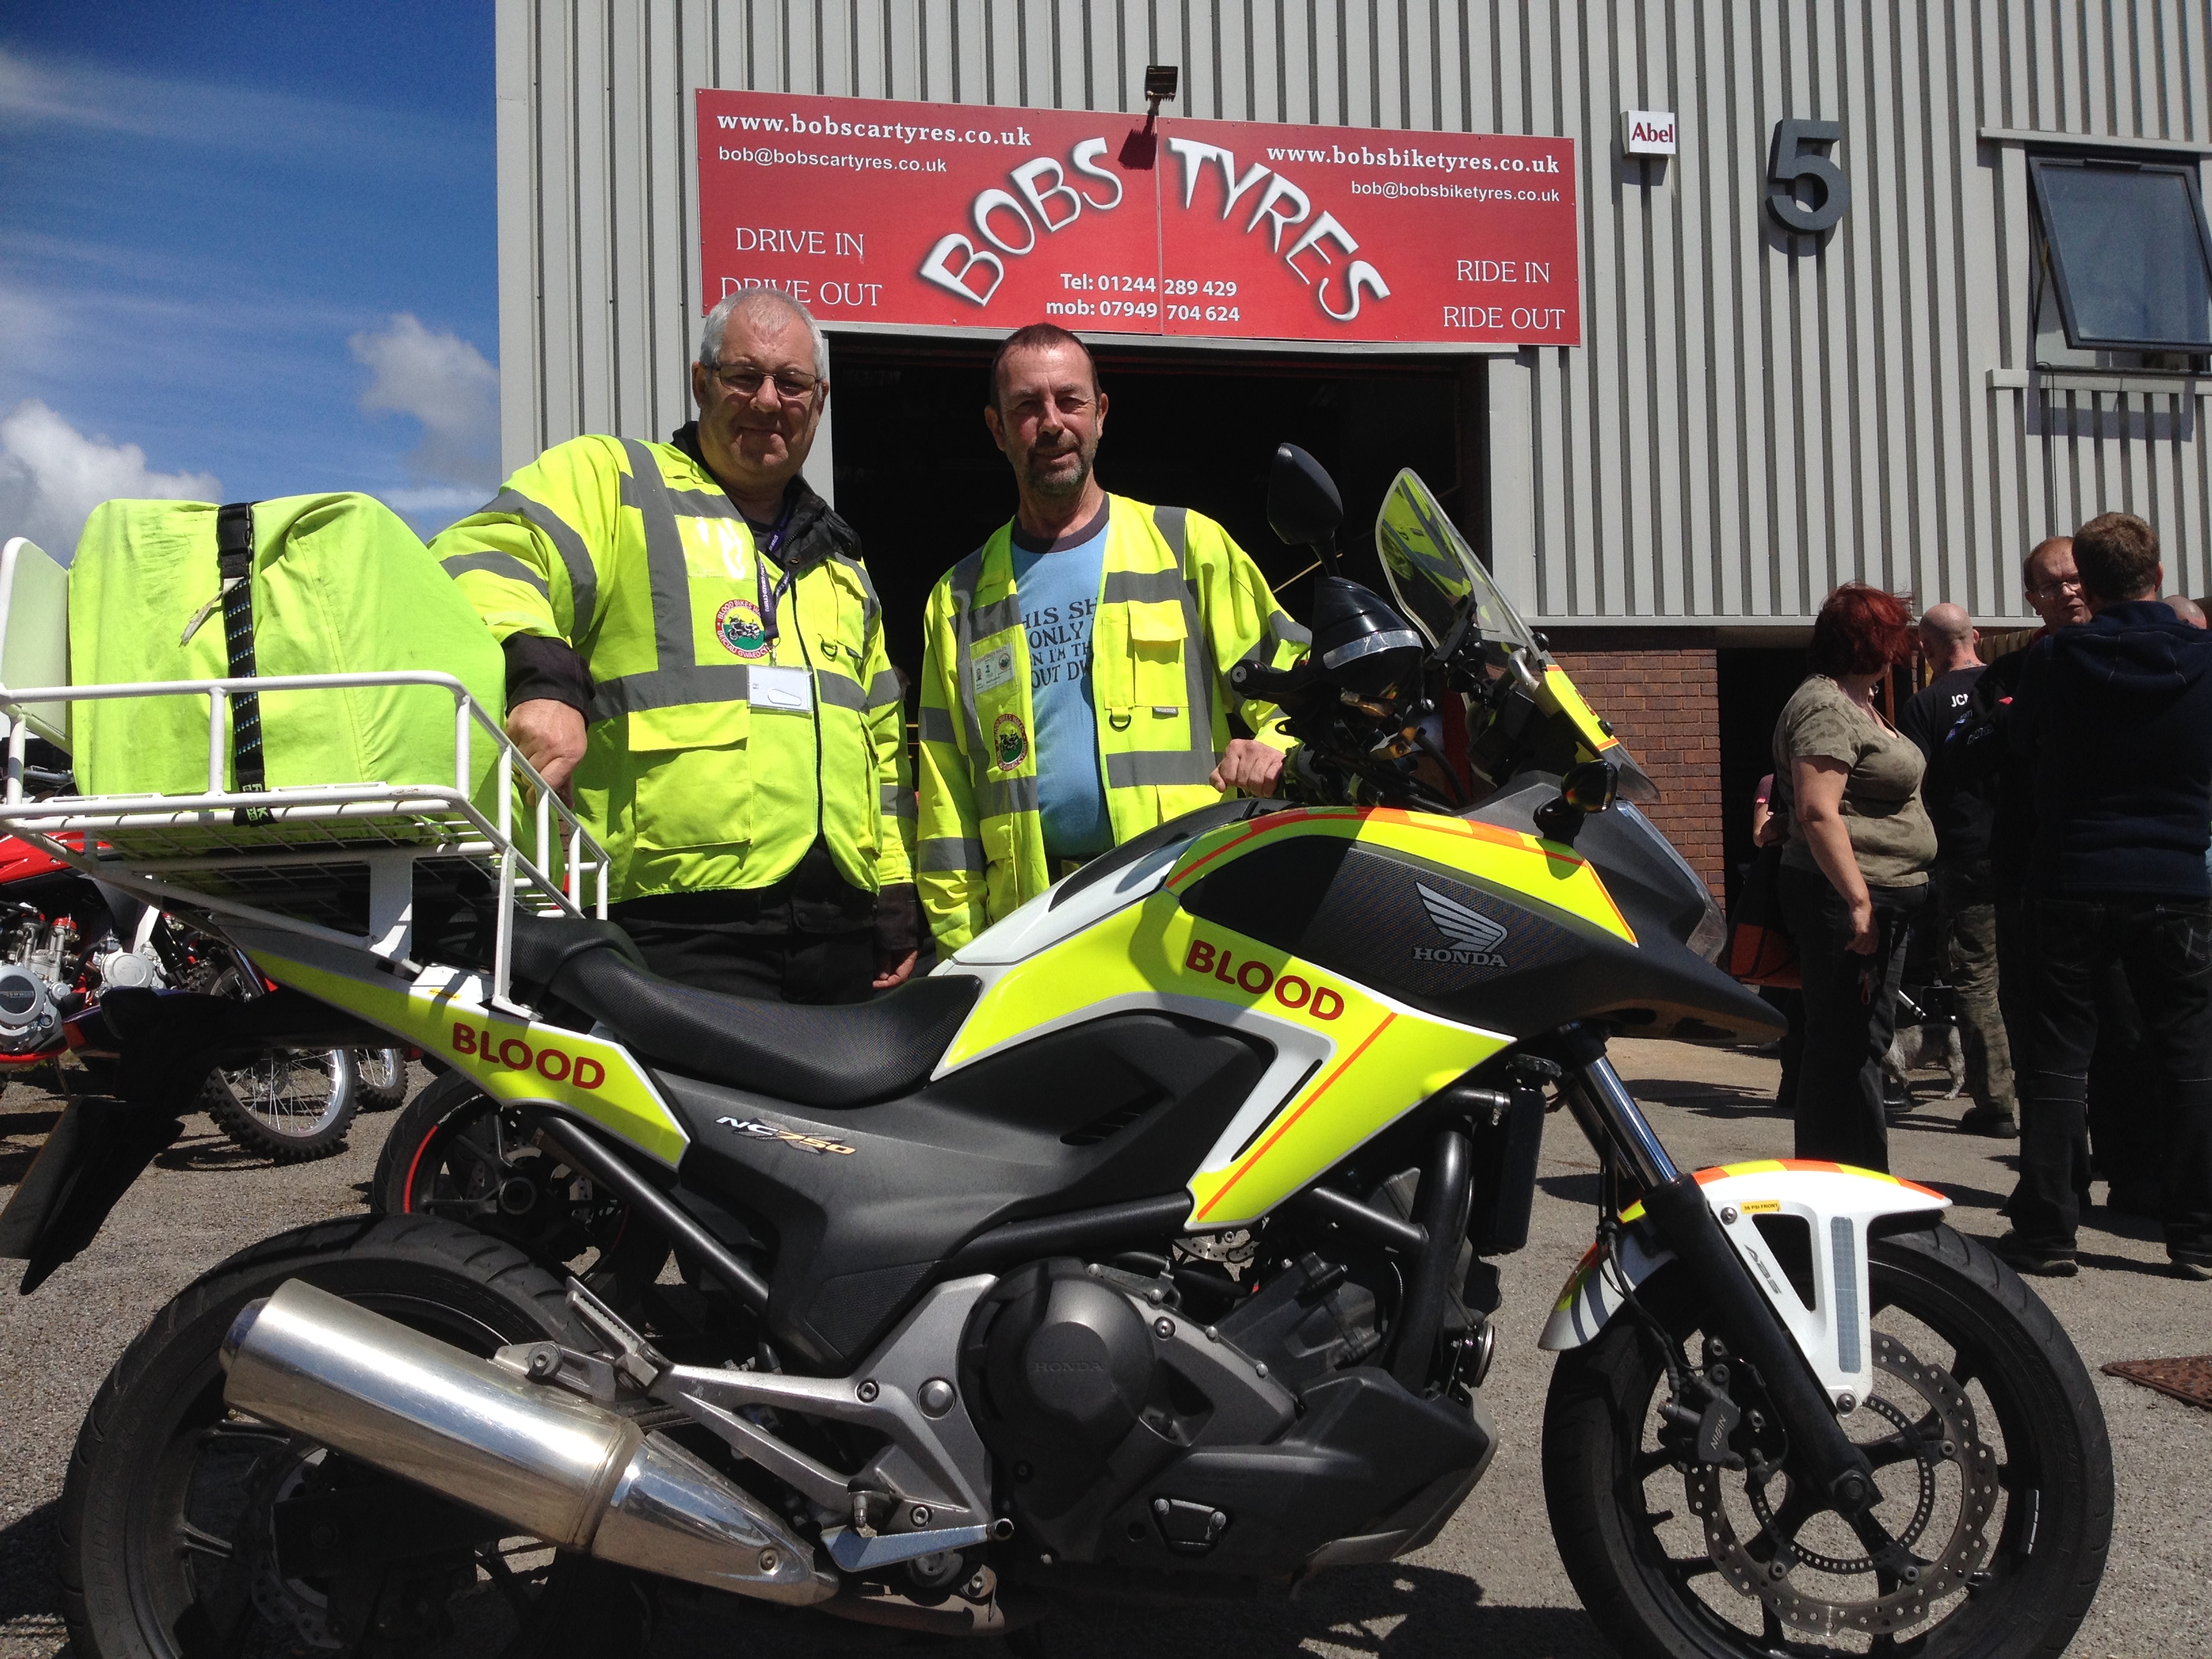 Blood Bikes Wales at Bobs Bike Tyres, Open Day July 2017